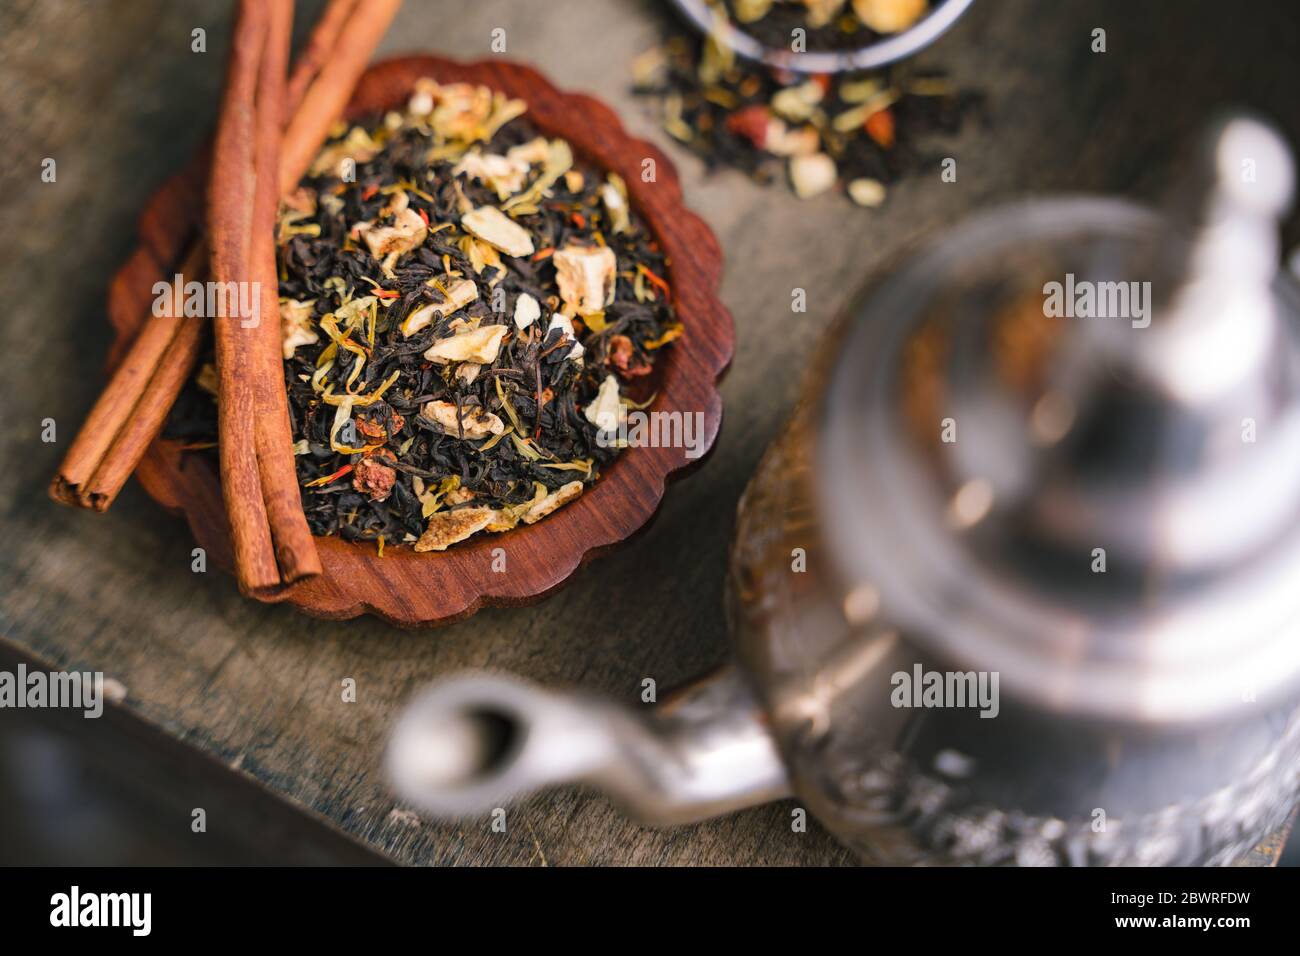 Aromatic fruity black tea dried leaves and cinnamon bark strips laid on small wooden tray with metal kettle in foreground Stock Photo